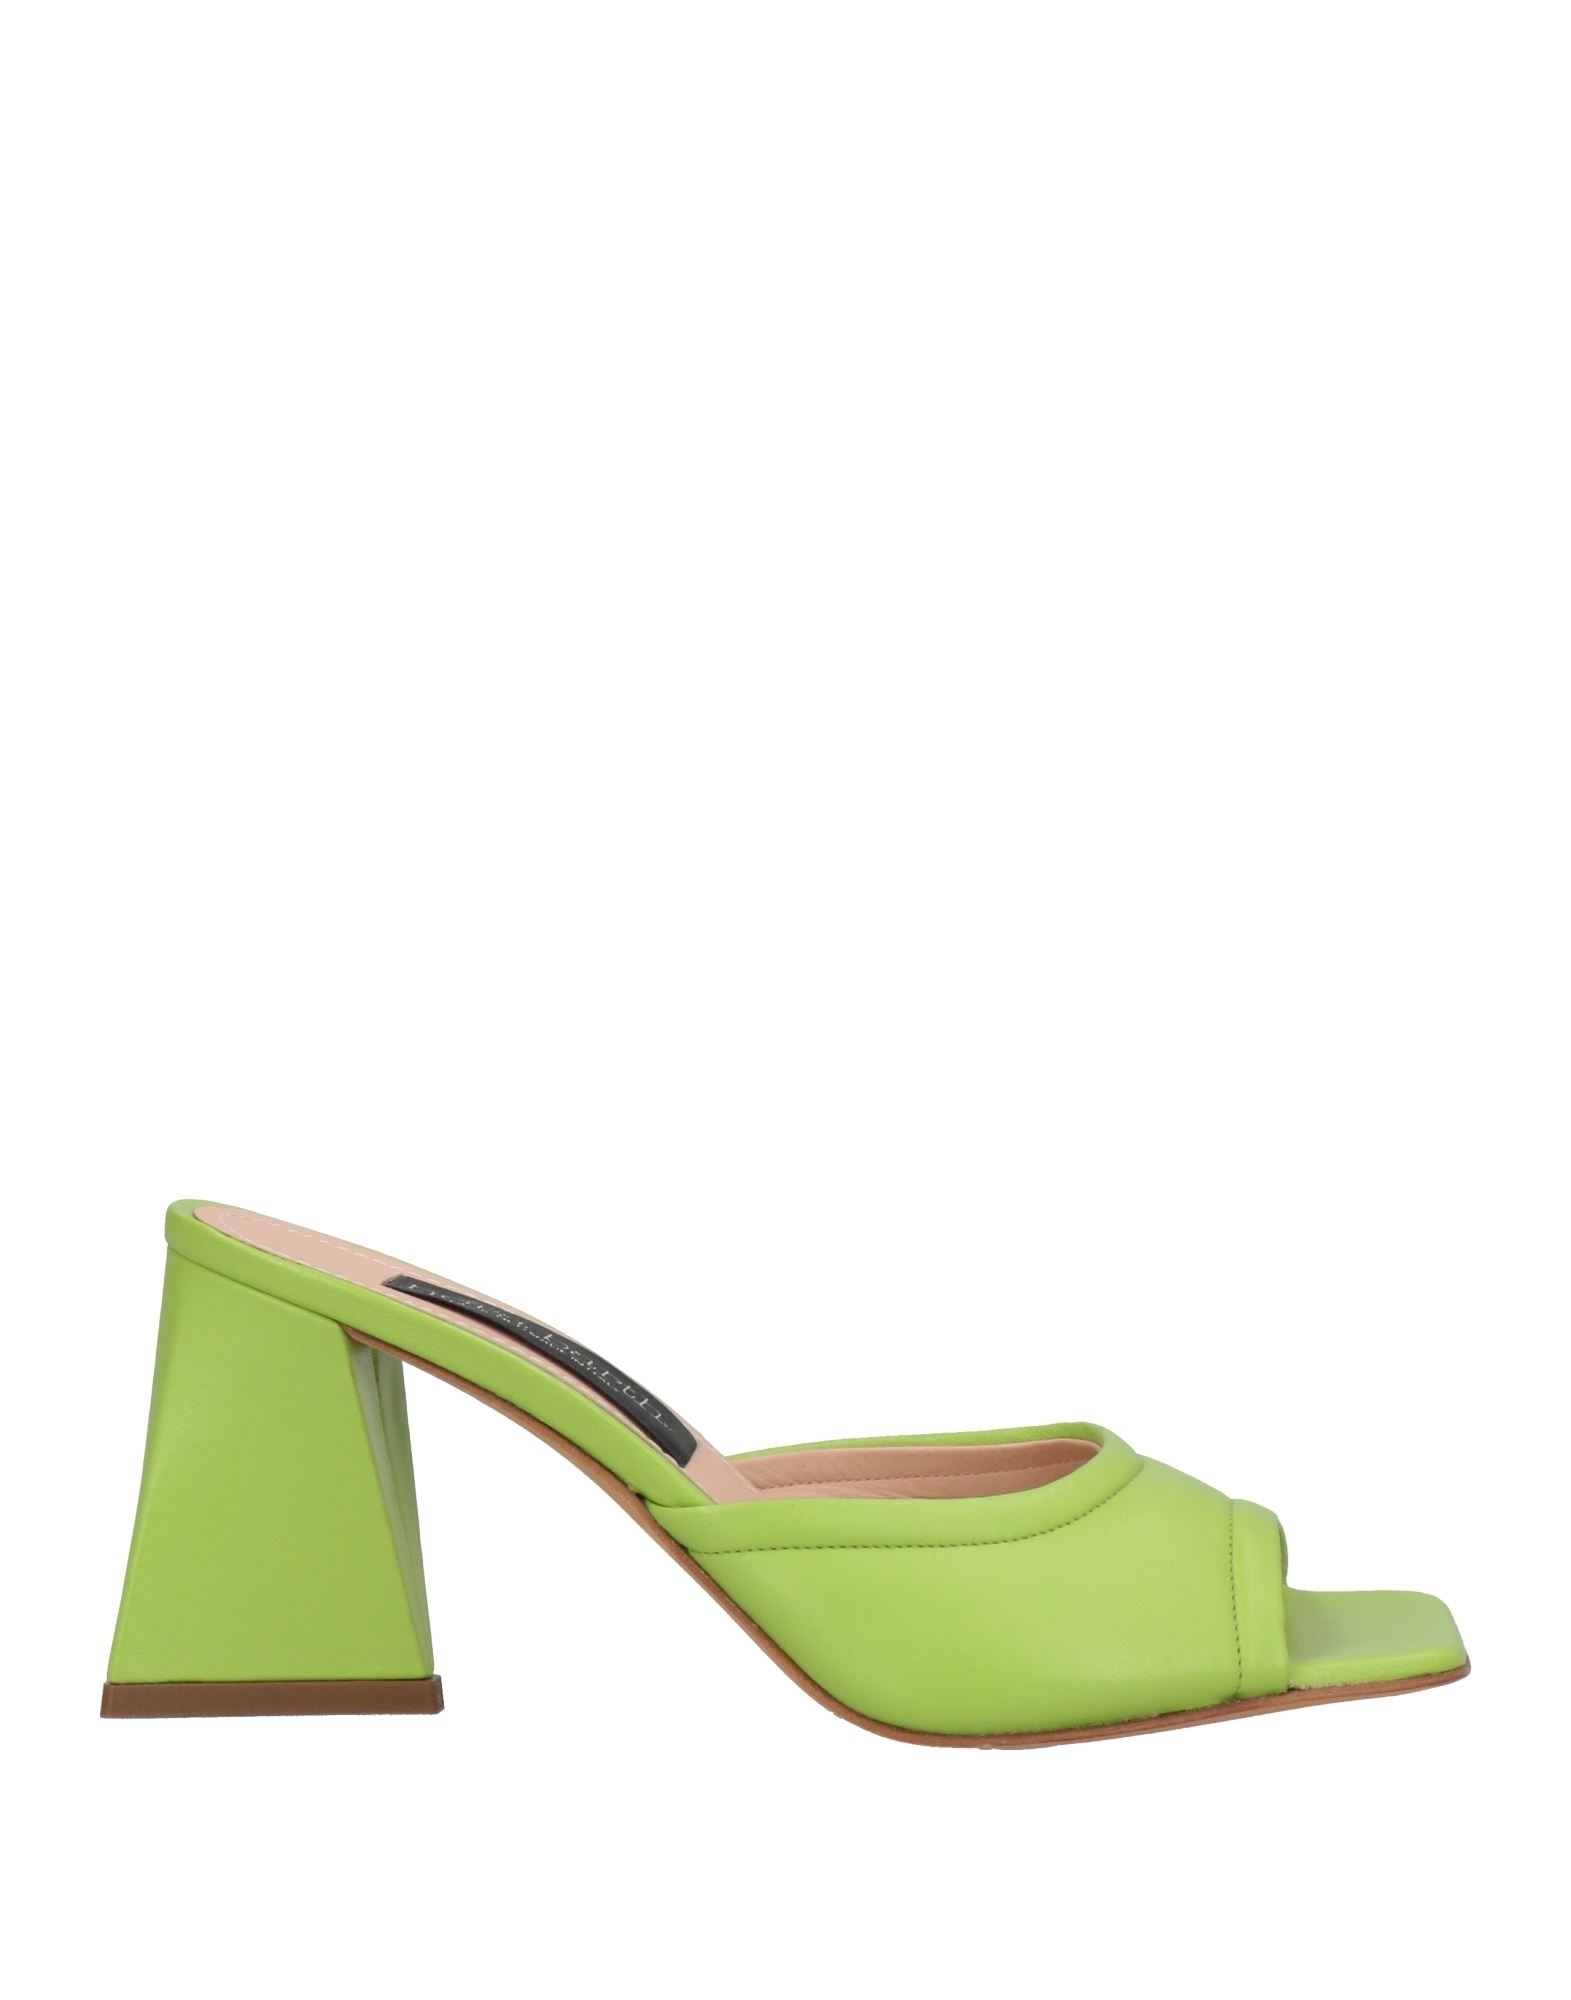 Nora Barth Sandals In Green